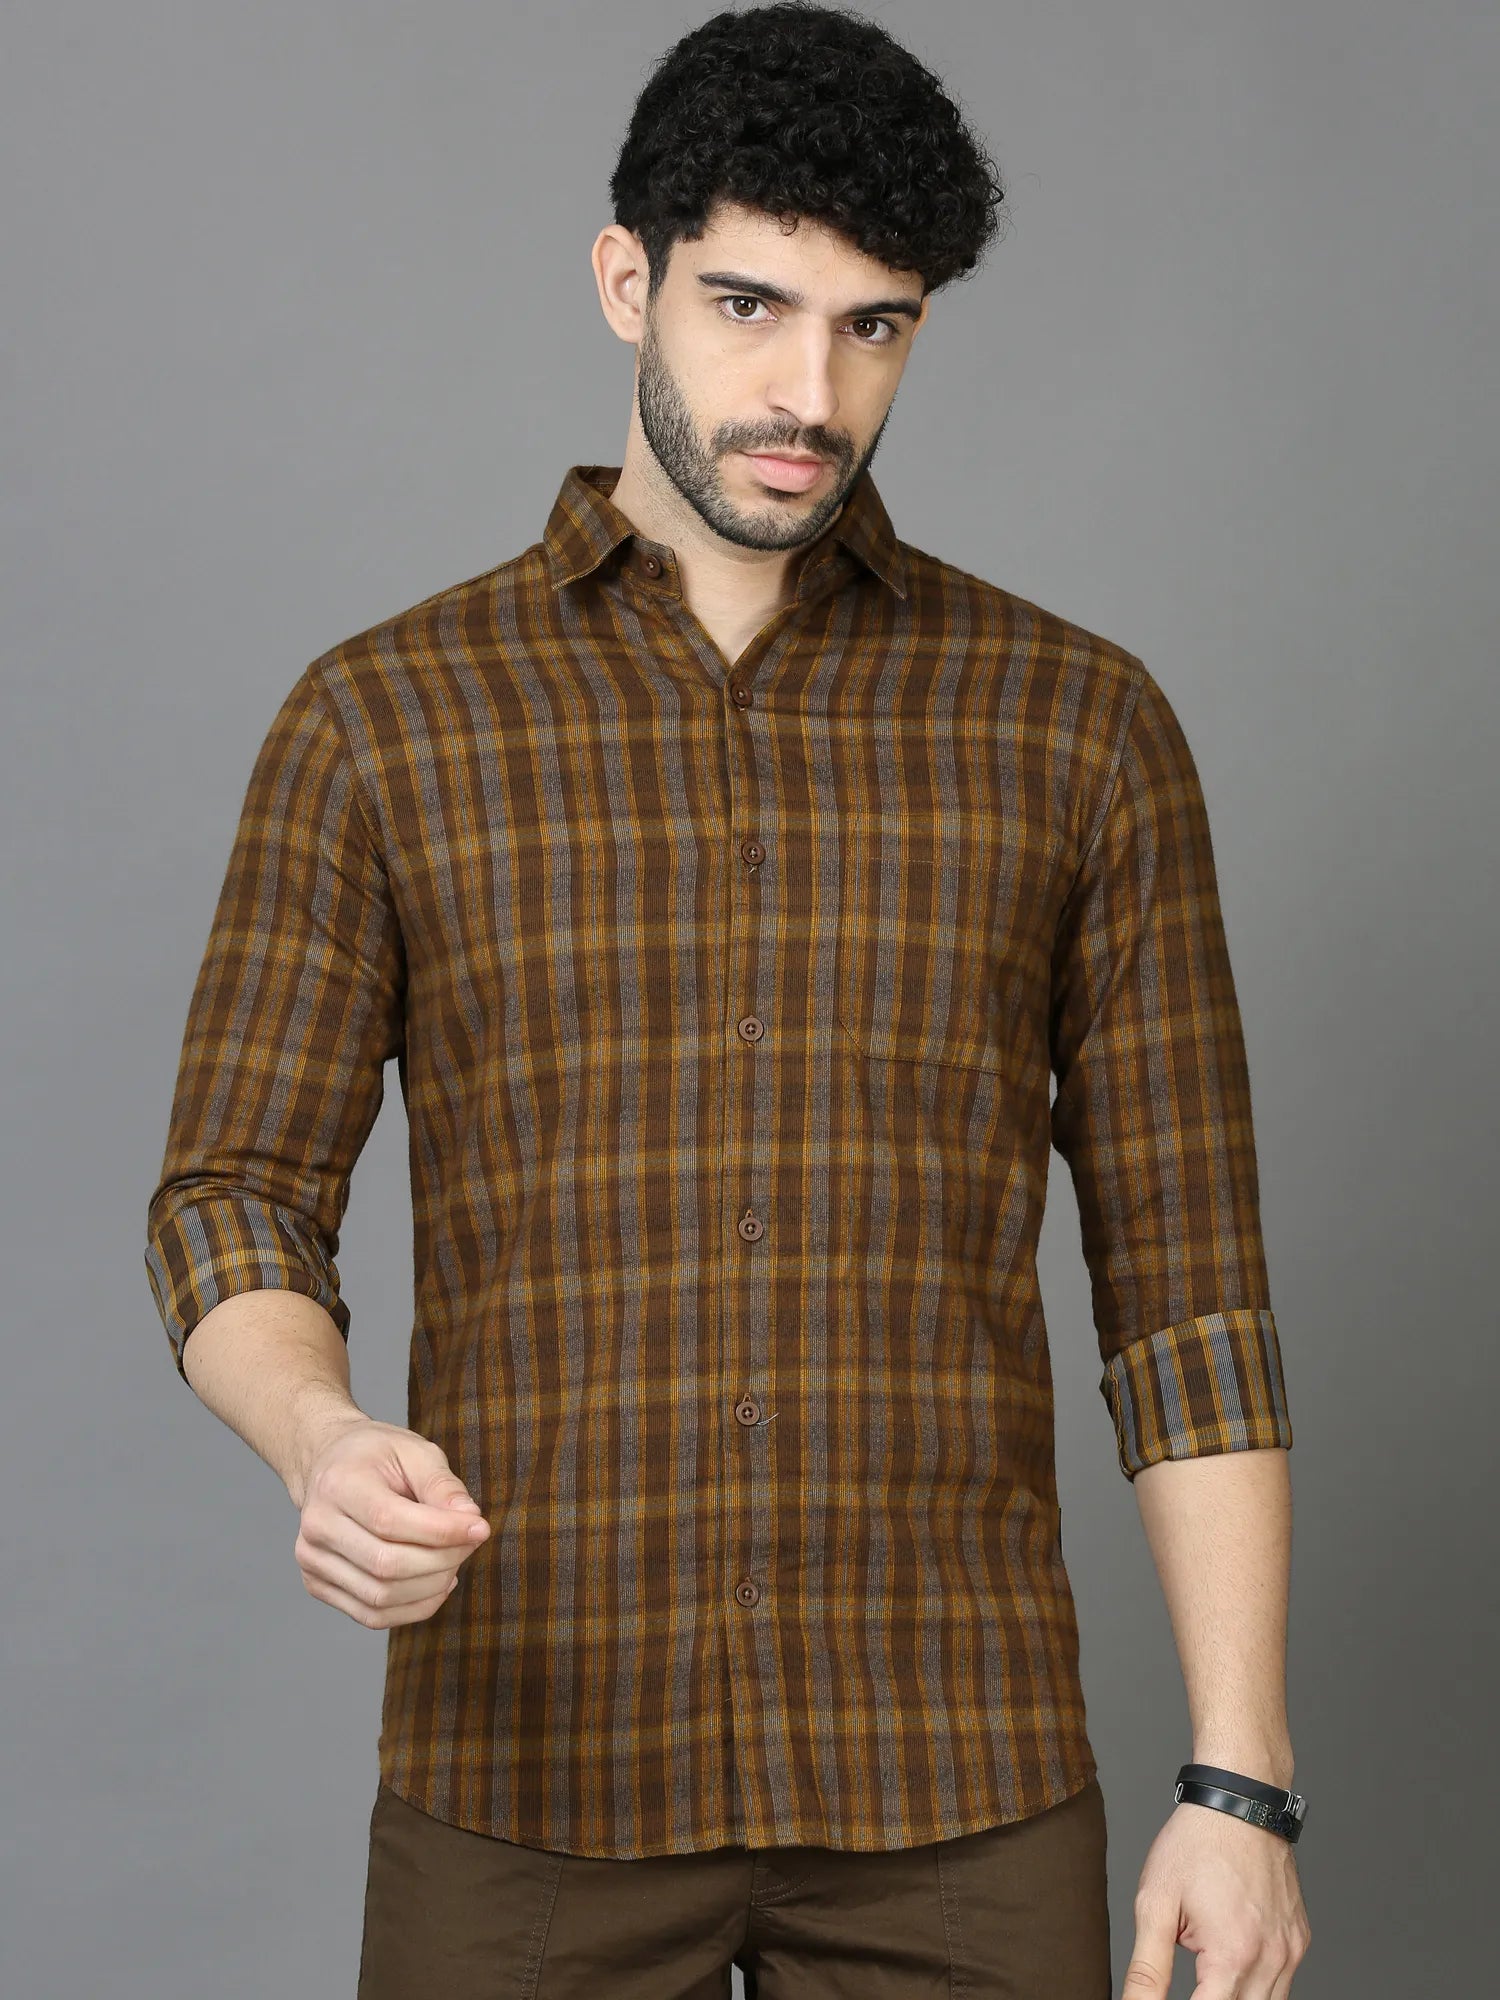 Dusty Tines Brown Chckered Shirt for Men 